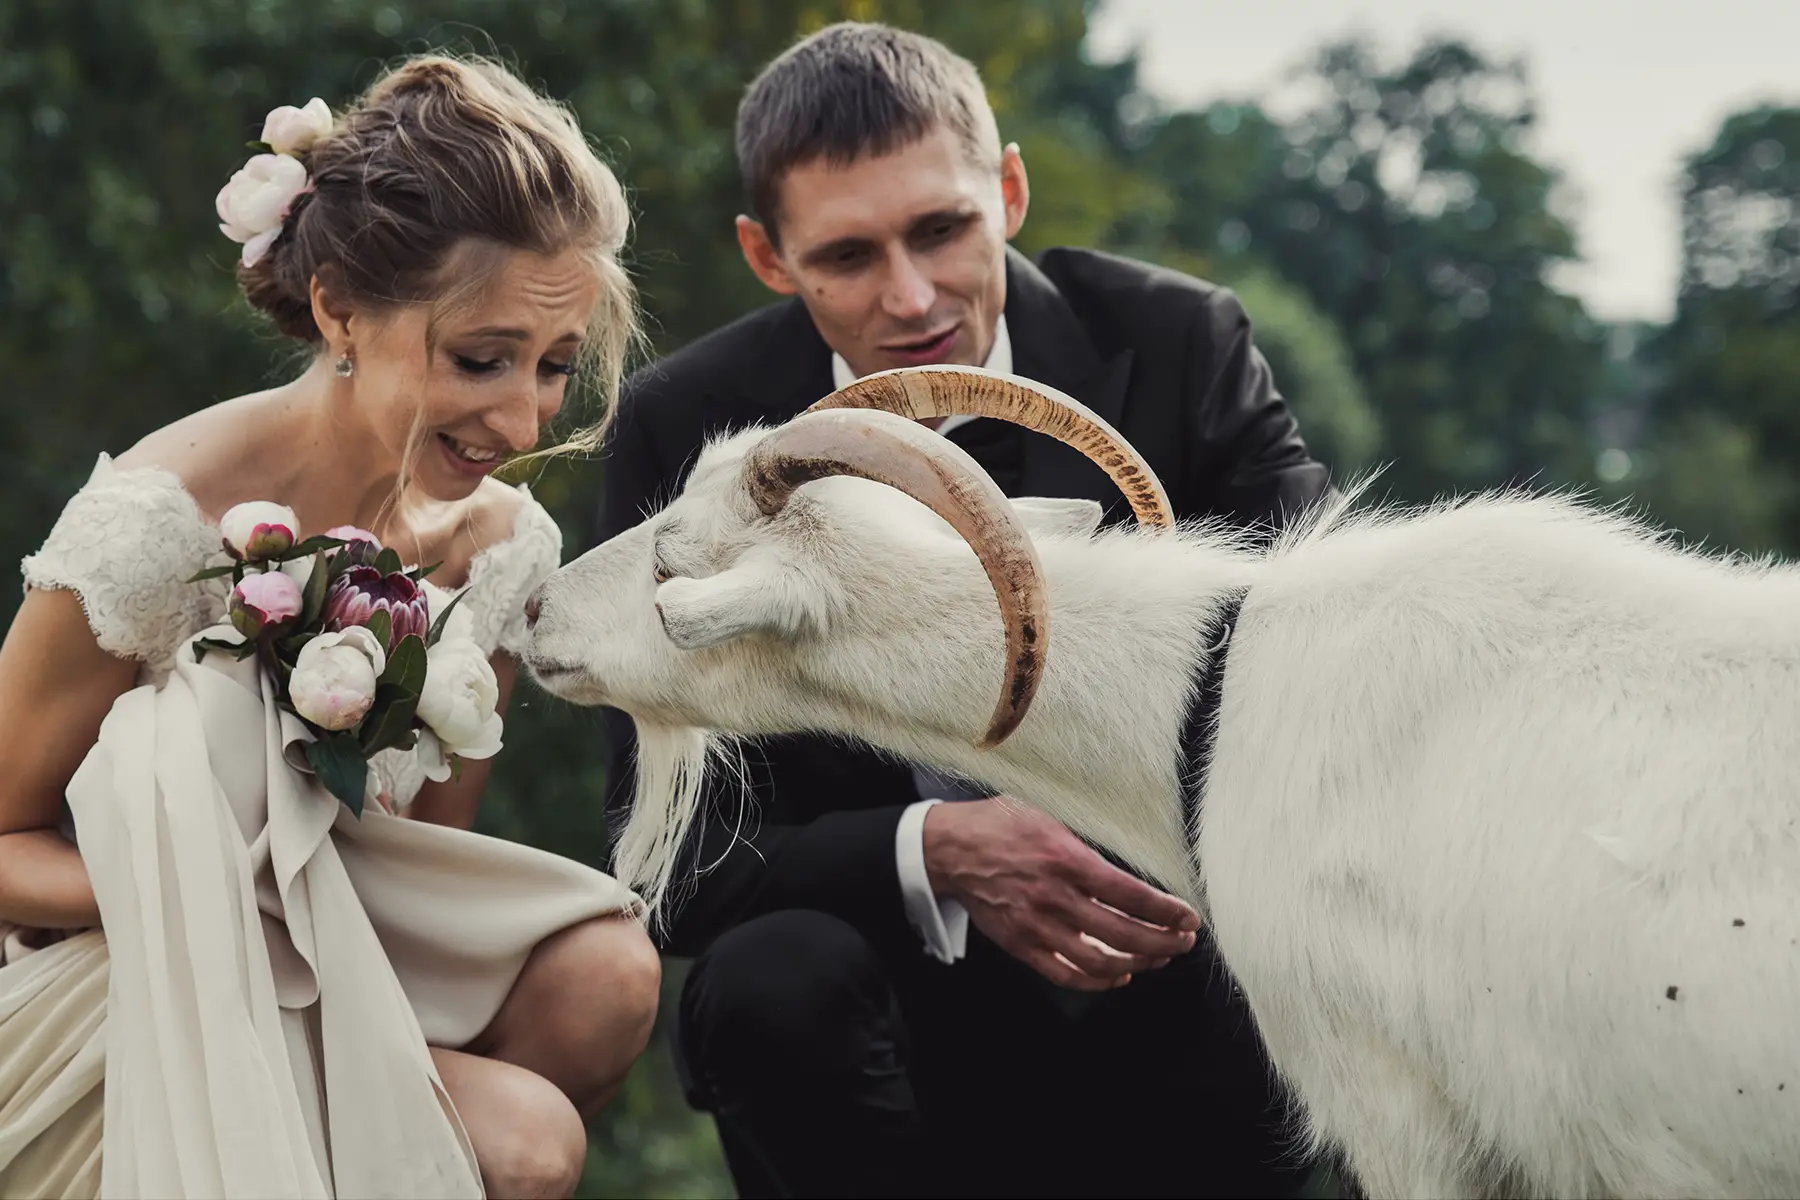 Married couple at a wedding with a goat